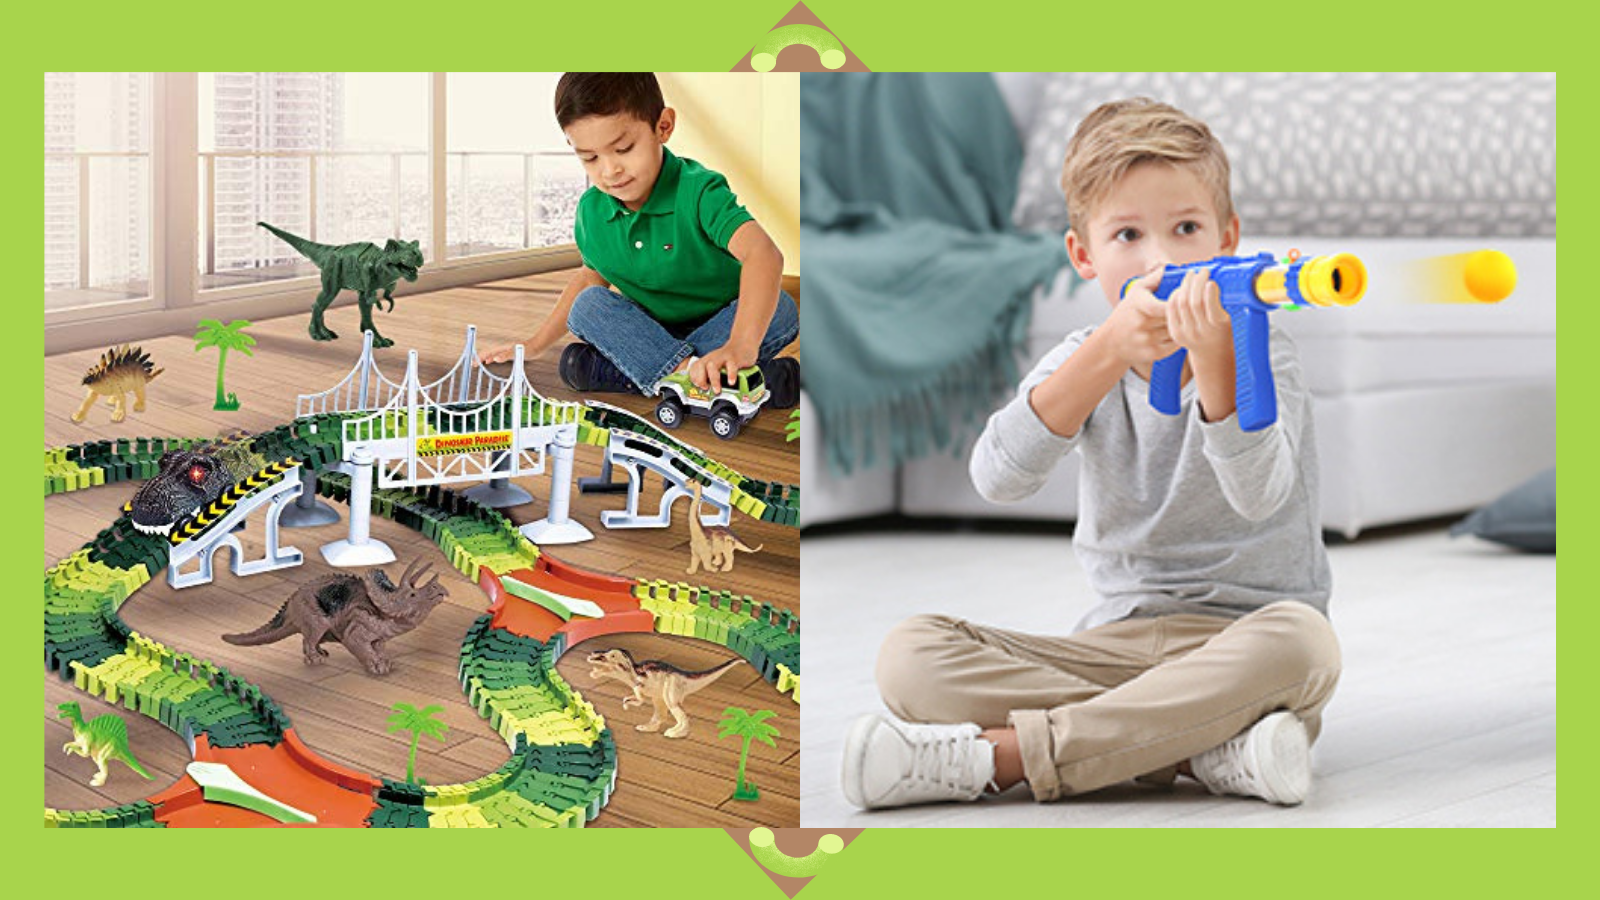 Kids playing with best dinosaur toys.